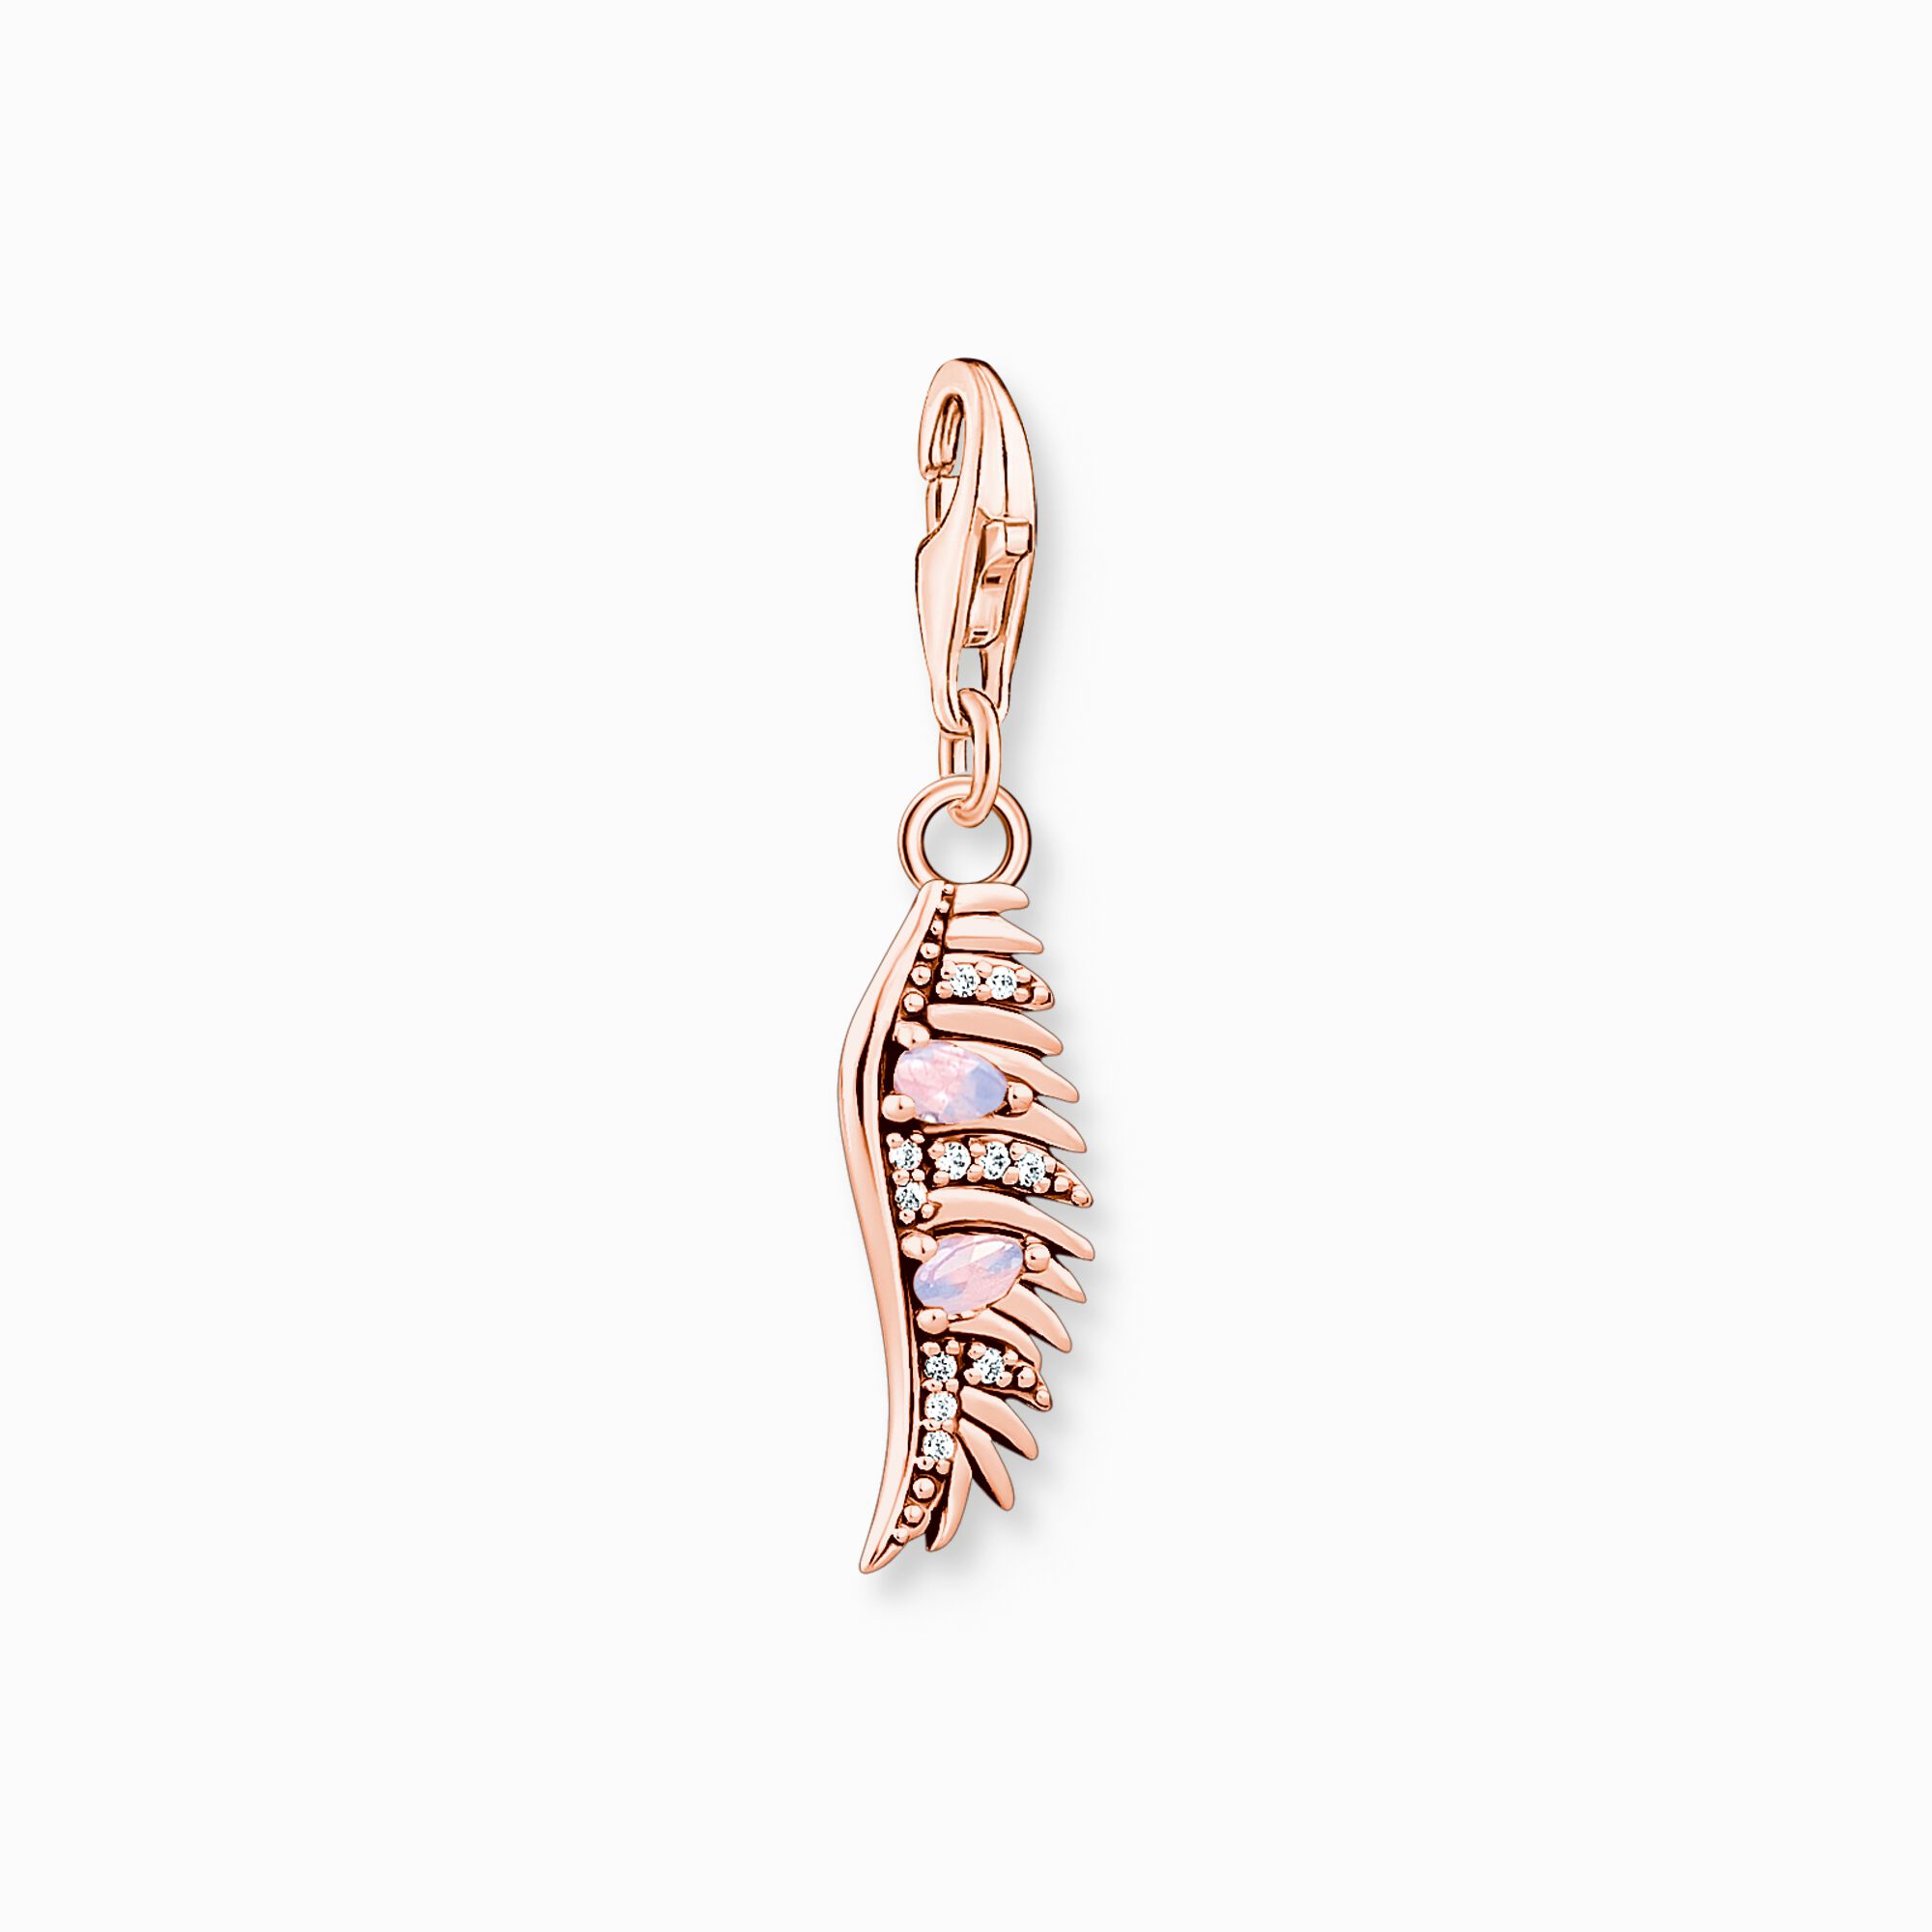 Charm pendant phoenix feather with pink stones rose gold from the Charm Club collection in the THOMAS SABO online store